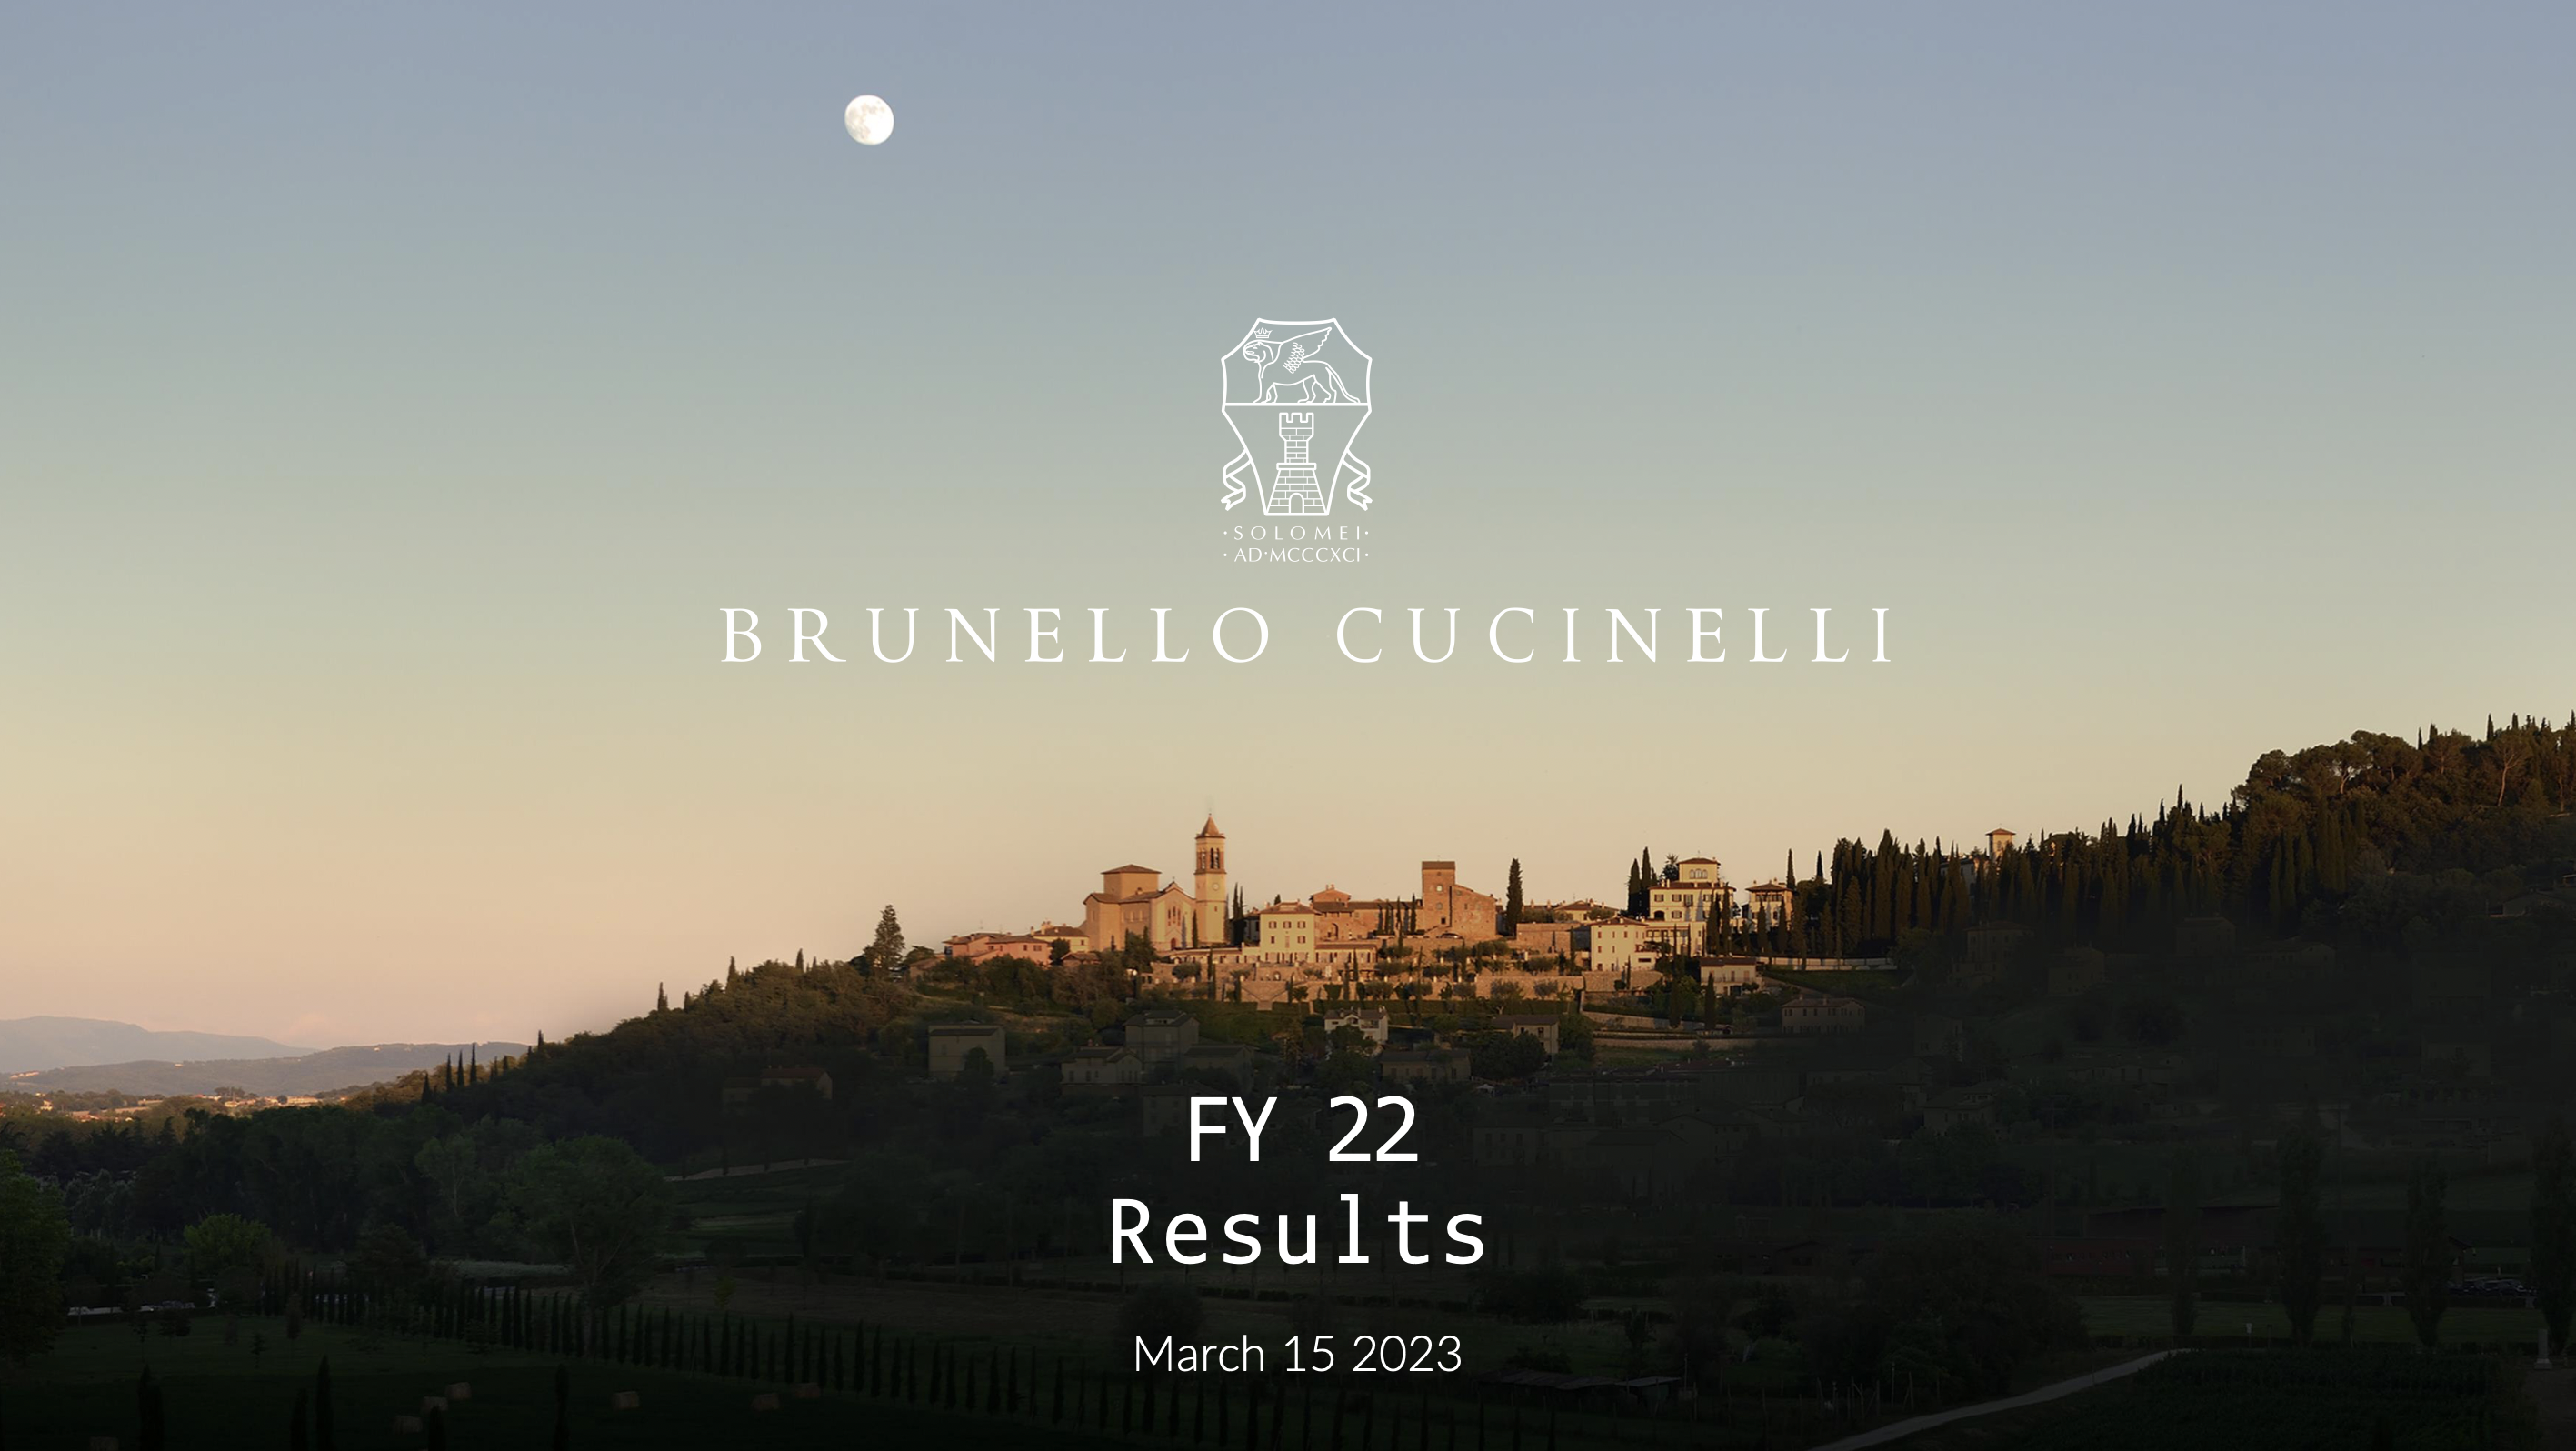 Brunello Cucinelli Releases Full-year Financial Report, Plans to Focus on the Chinese Market in the Next Five Years